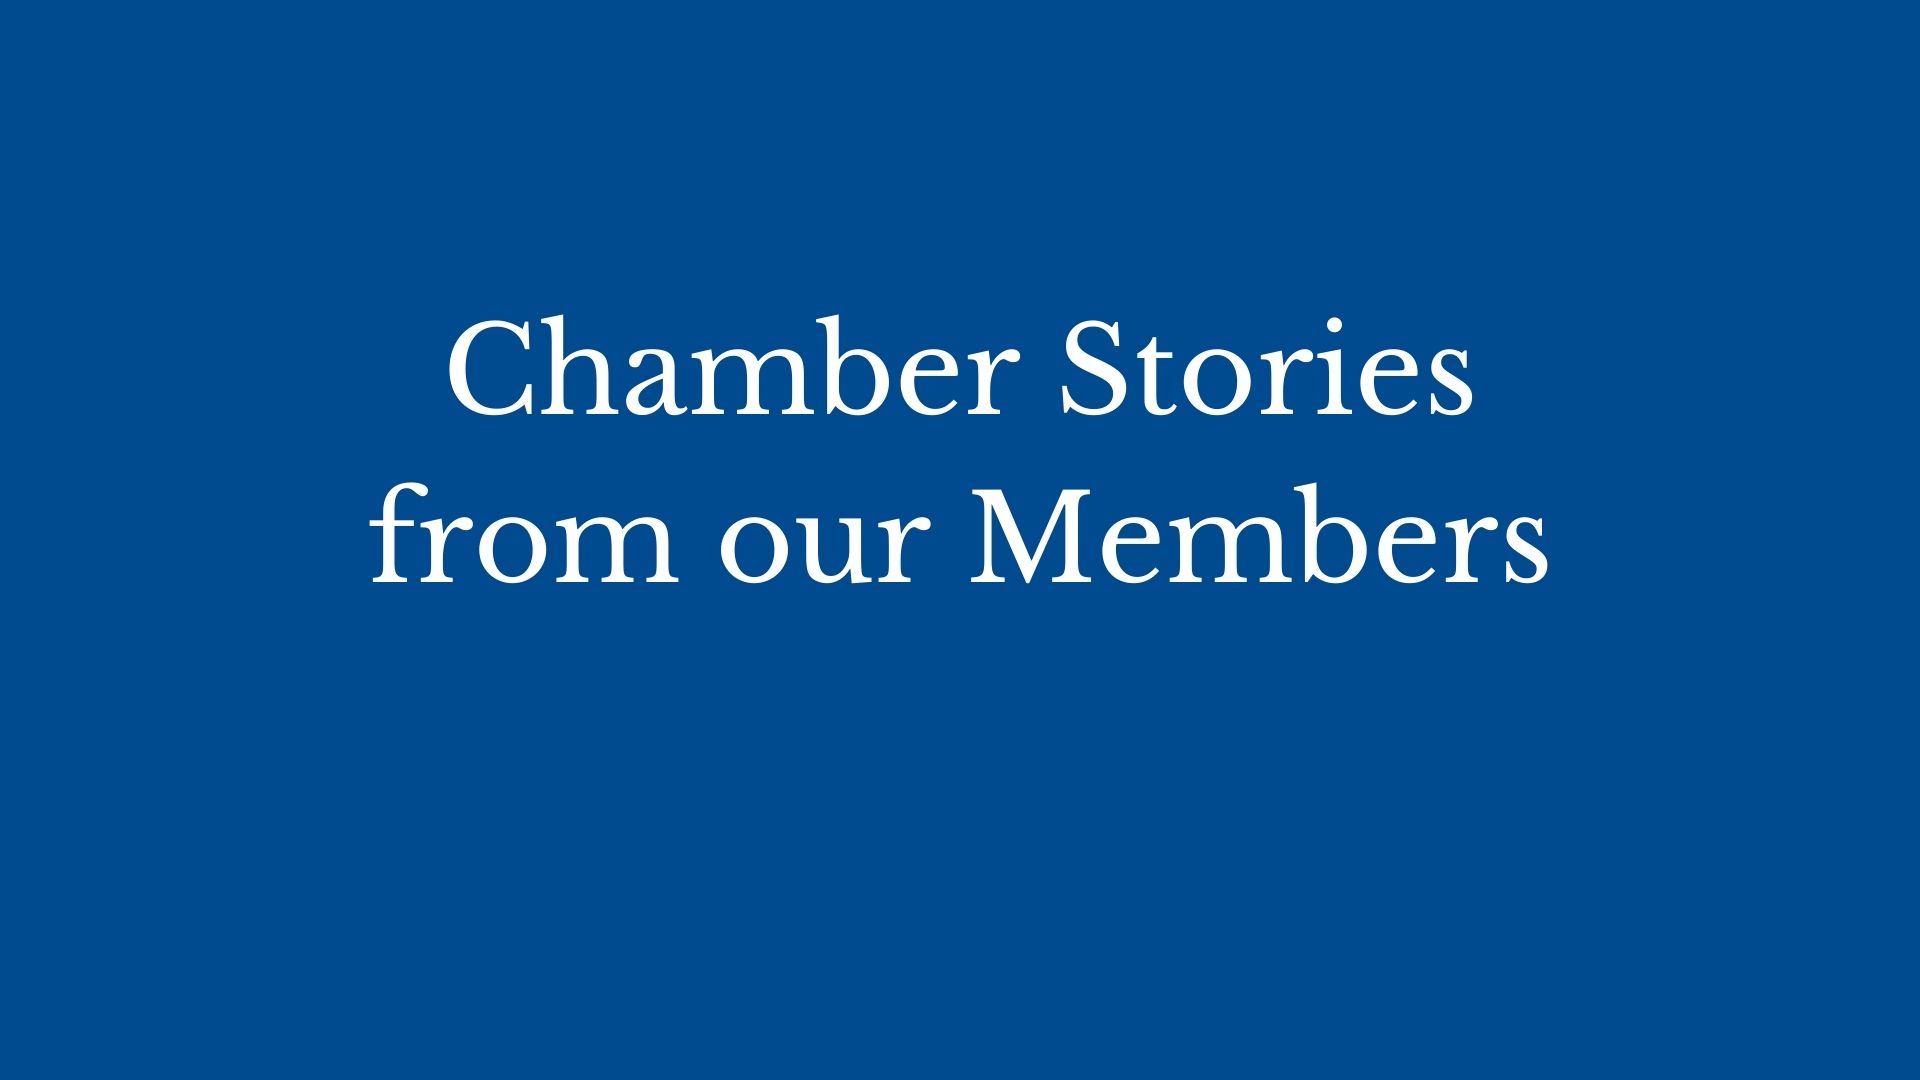 How has the Chamber helped your business